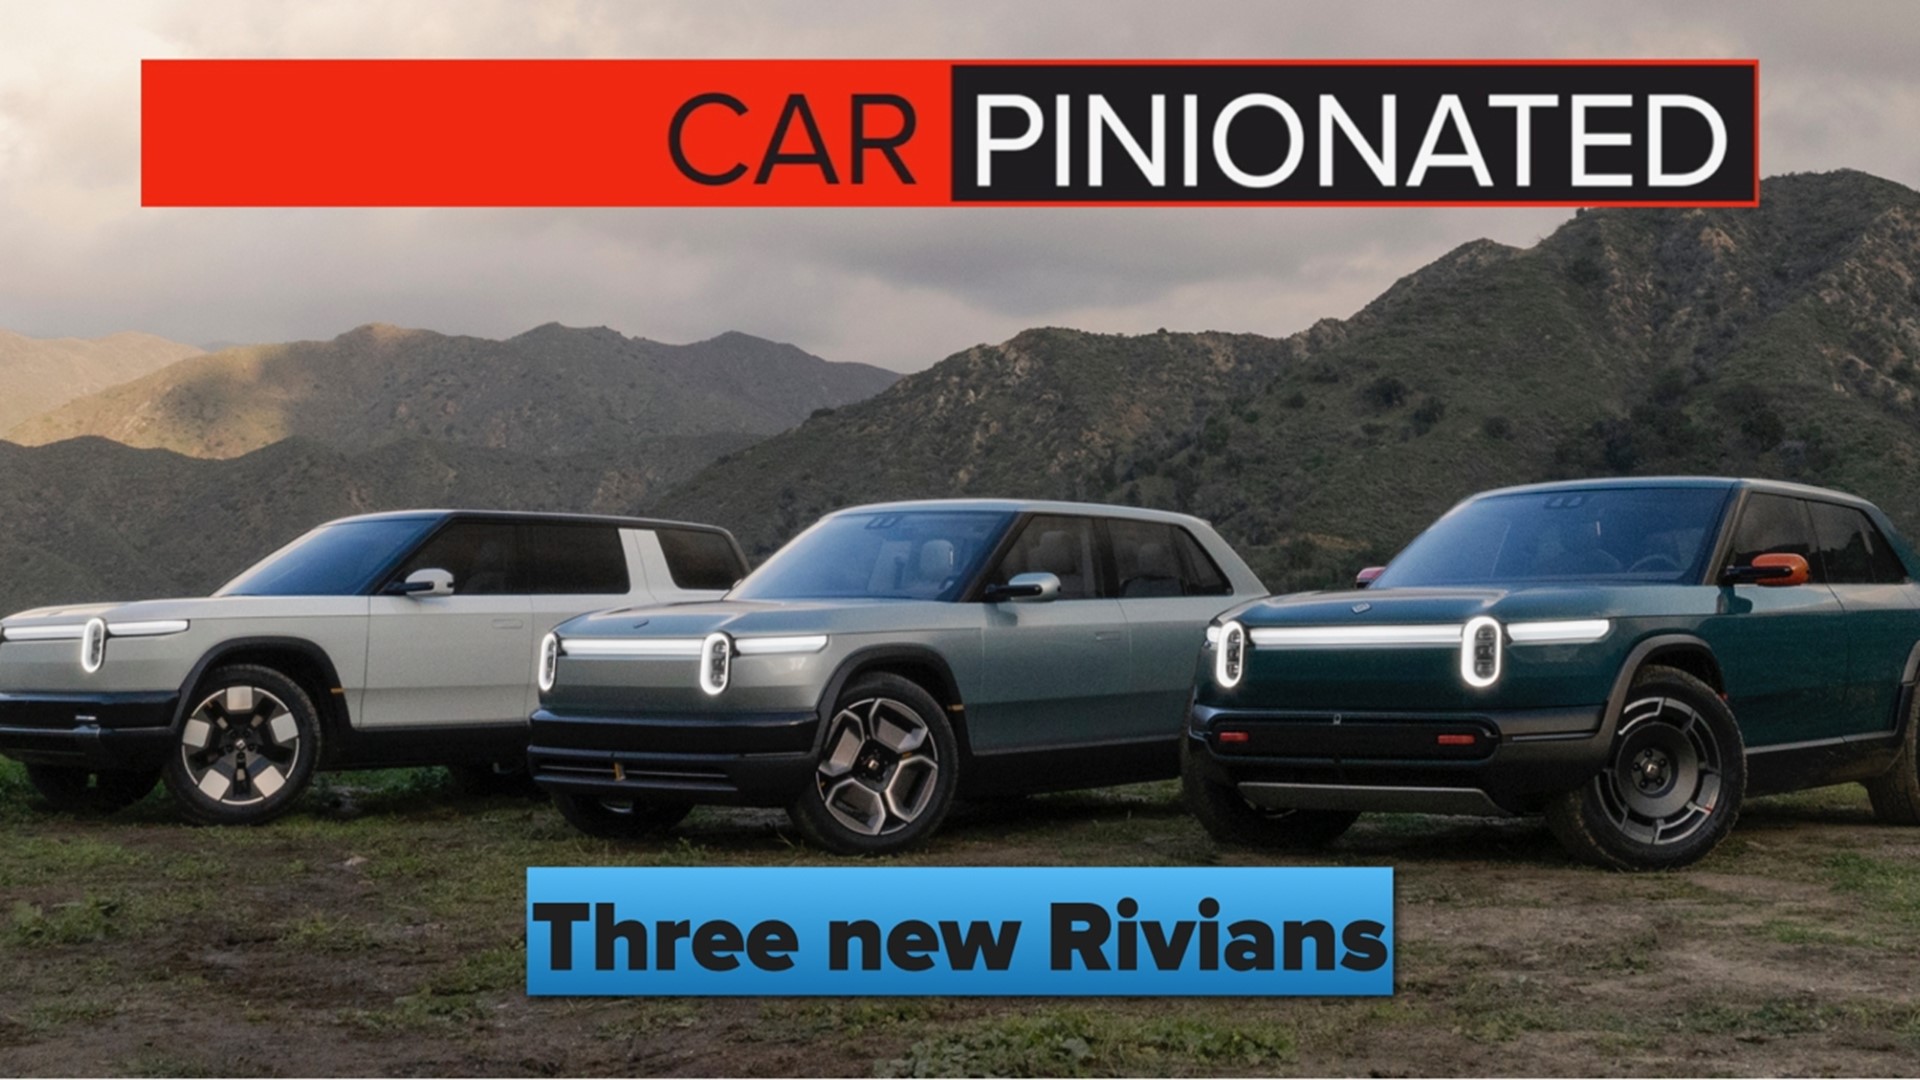 EV maker Rivian introduced not one, not two but three new models last month. We're still not fans of the headlights, but they are growing on us.